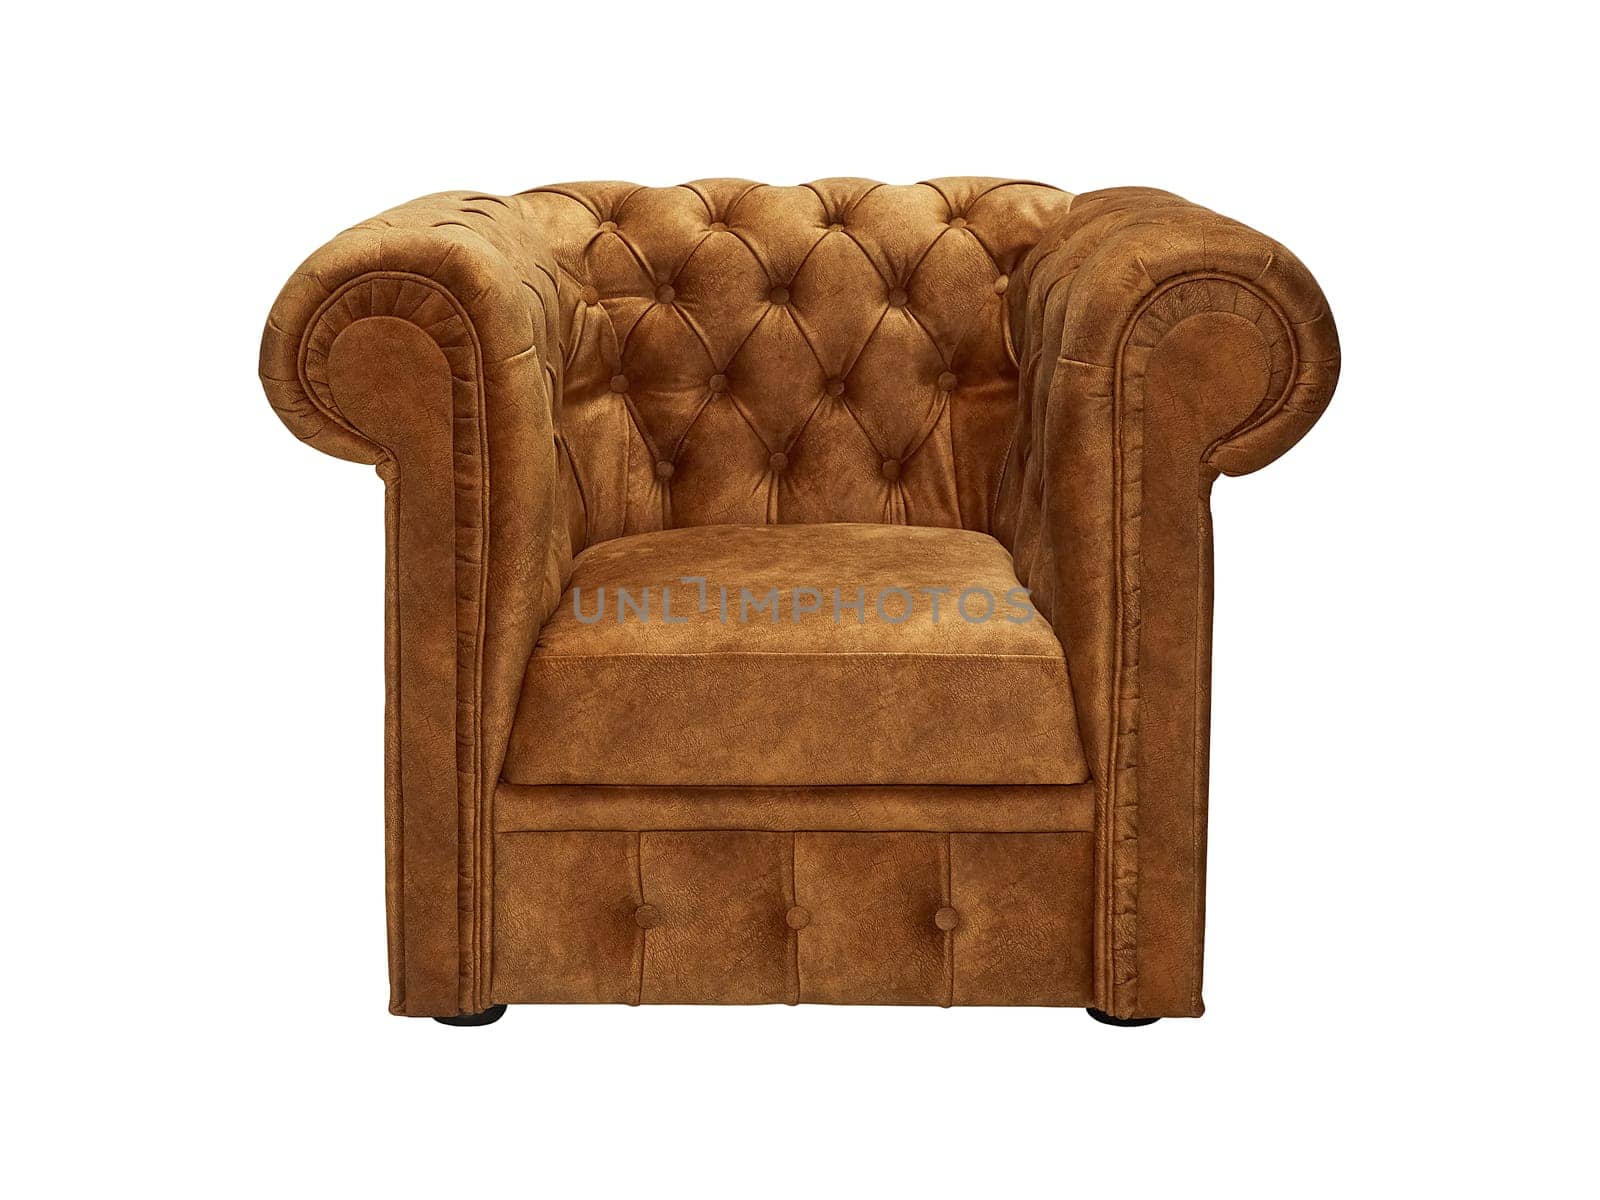 vintage brown leather armchair isolated on white background, front view.